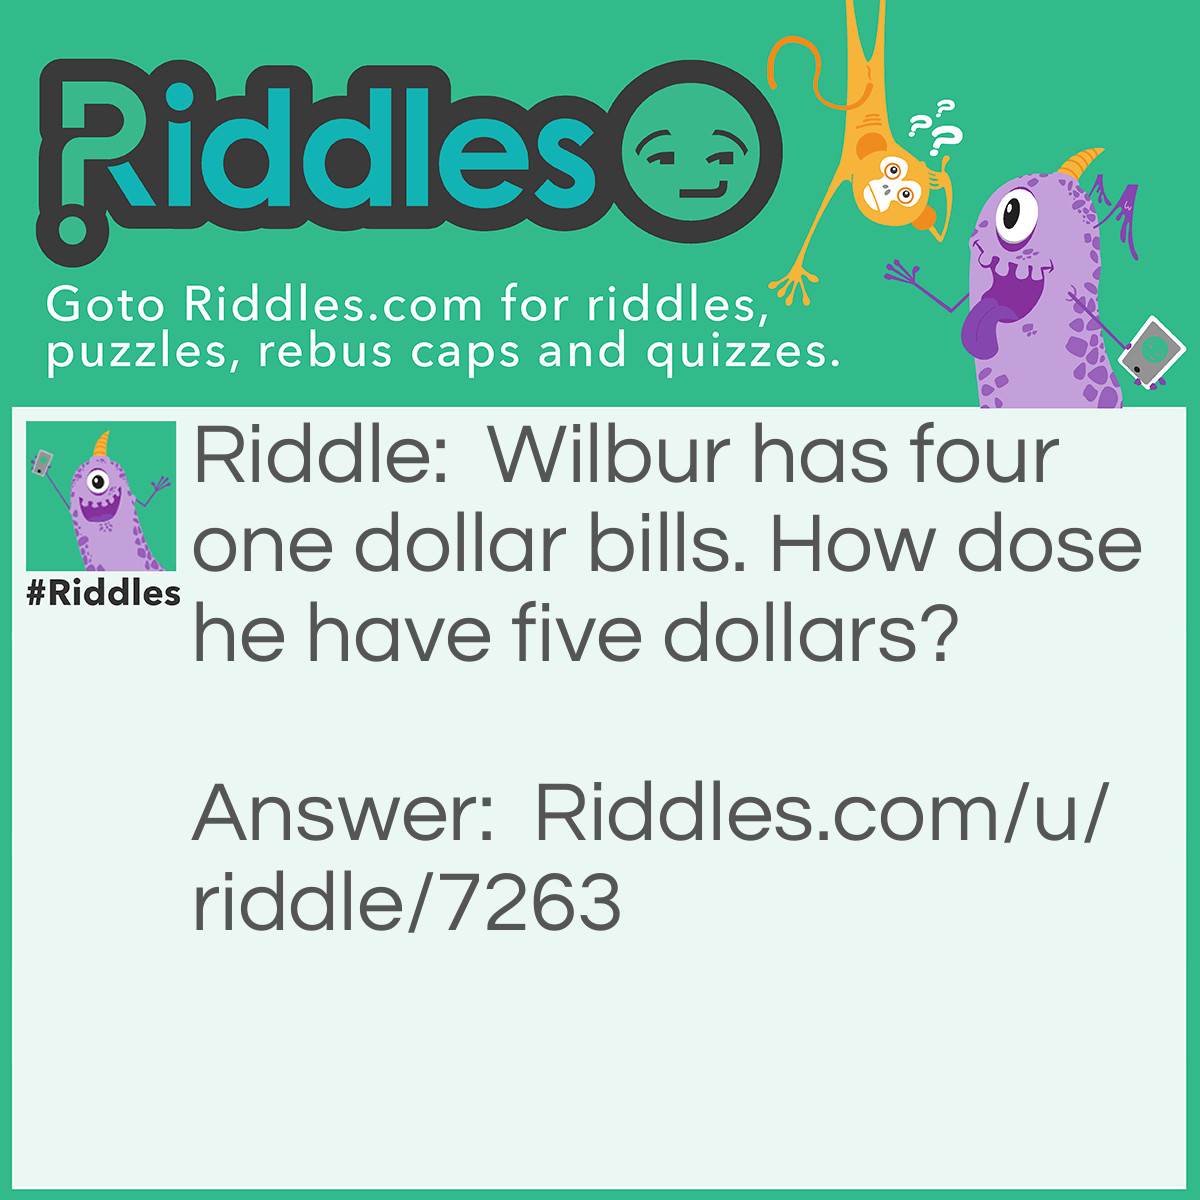 Riddle: Wilbur has four one dollar bills. How dose he have five dollars? Answer: Wilbur has one dollar in change.